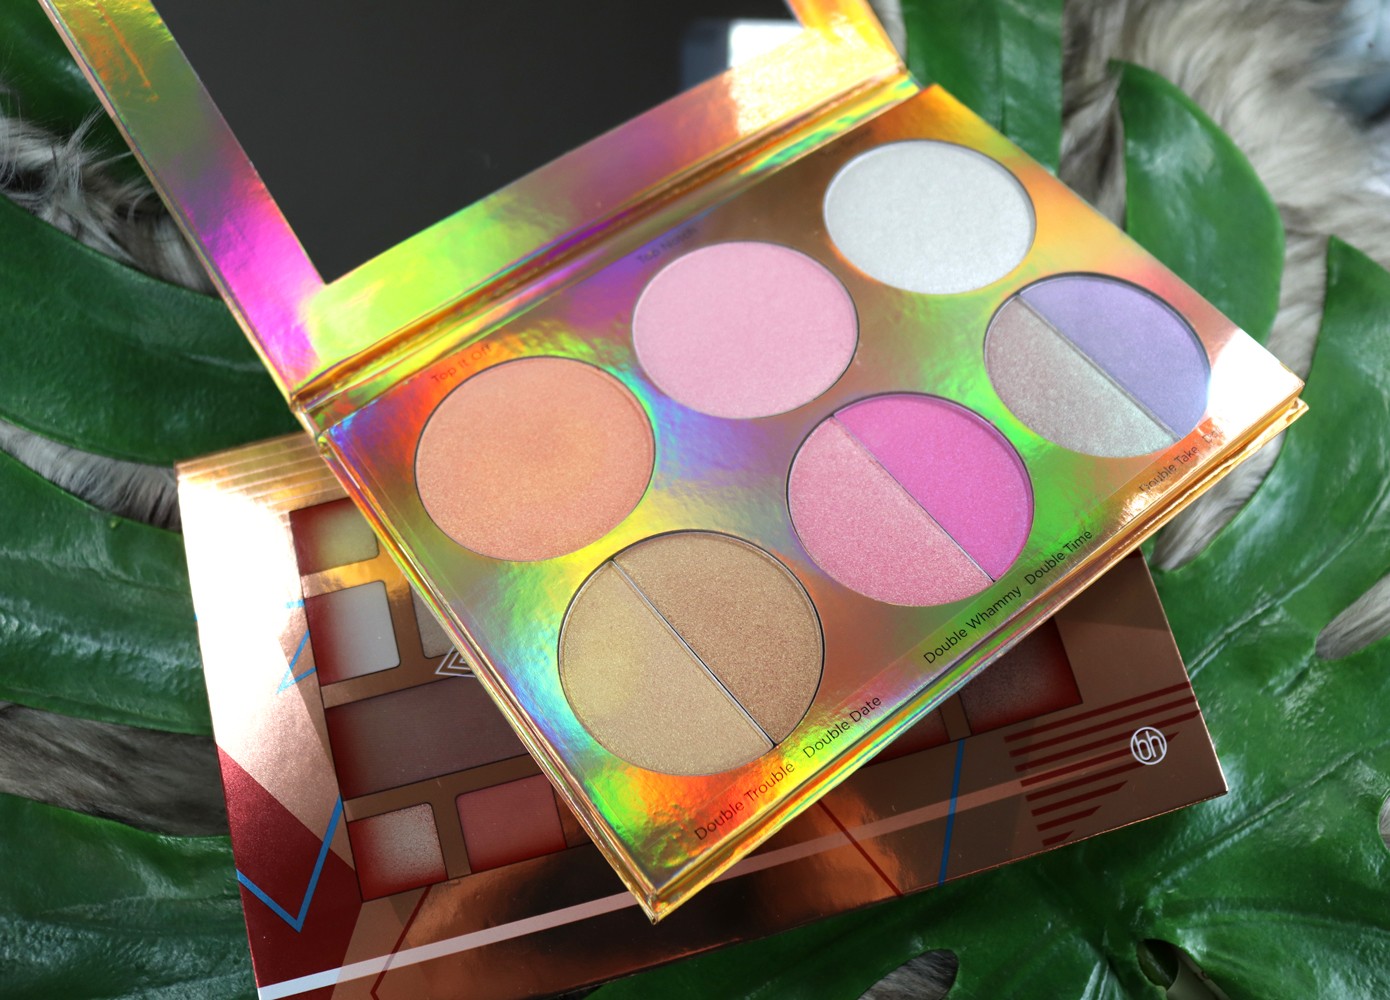 BH Cosmetics Highlighter Giveaway